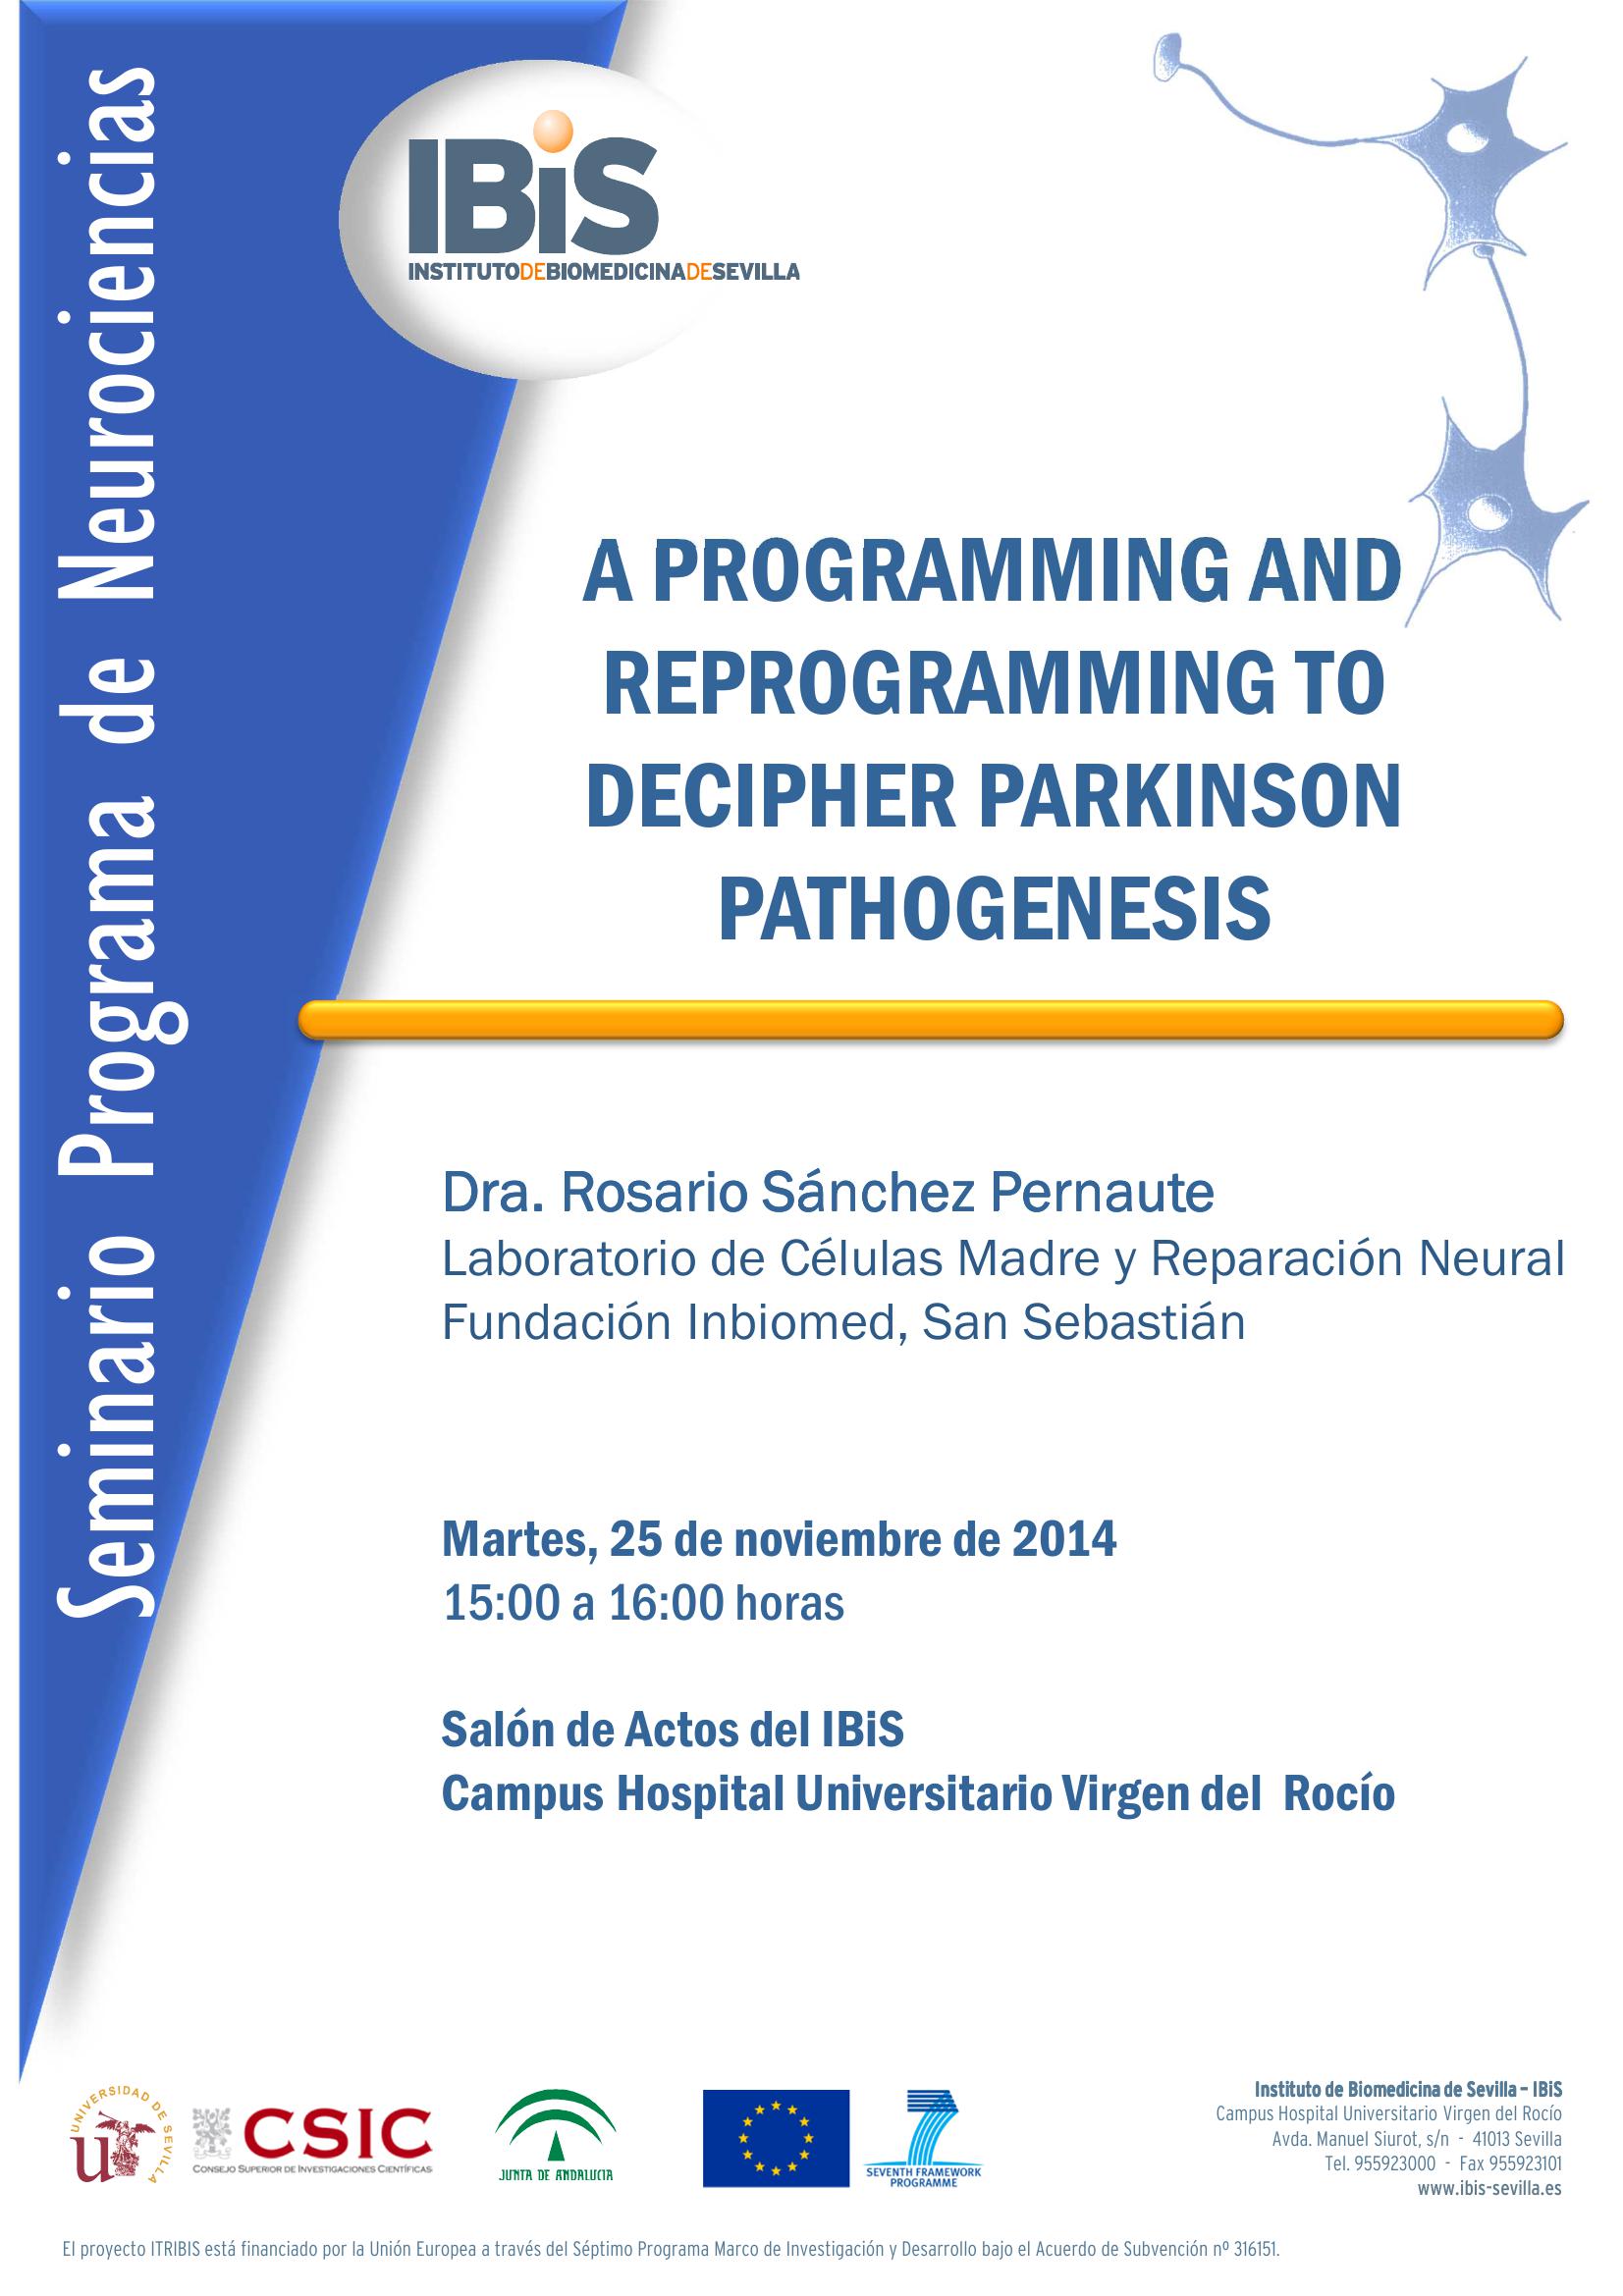 Poster: A PROGRAMMING AND REPROGRAMMING TO DECIPHER PARKINSON PATHOGENESIS